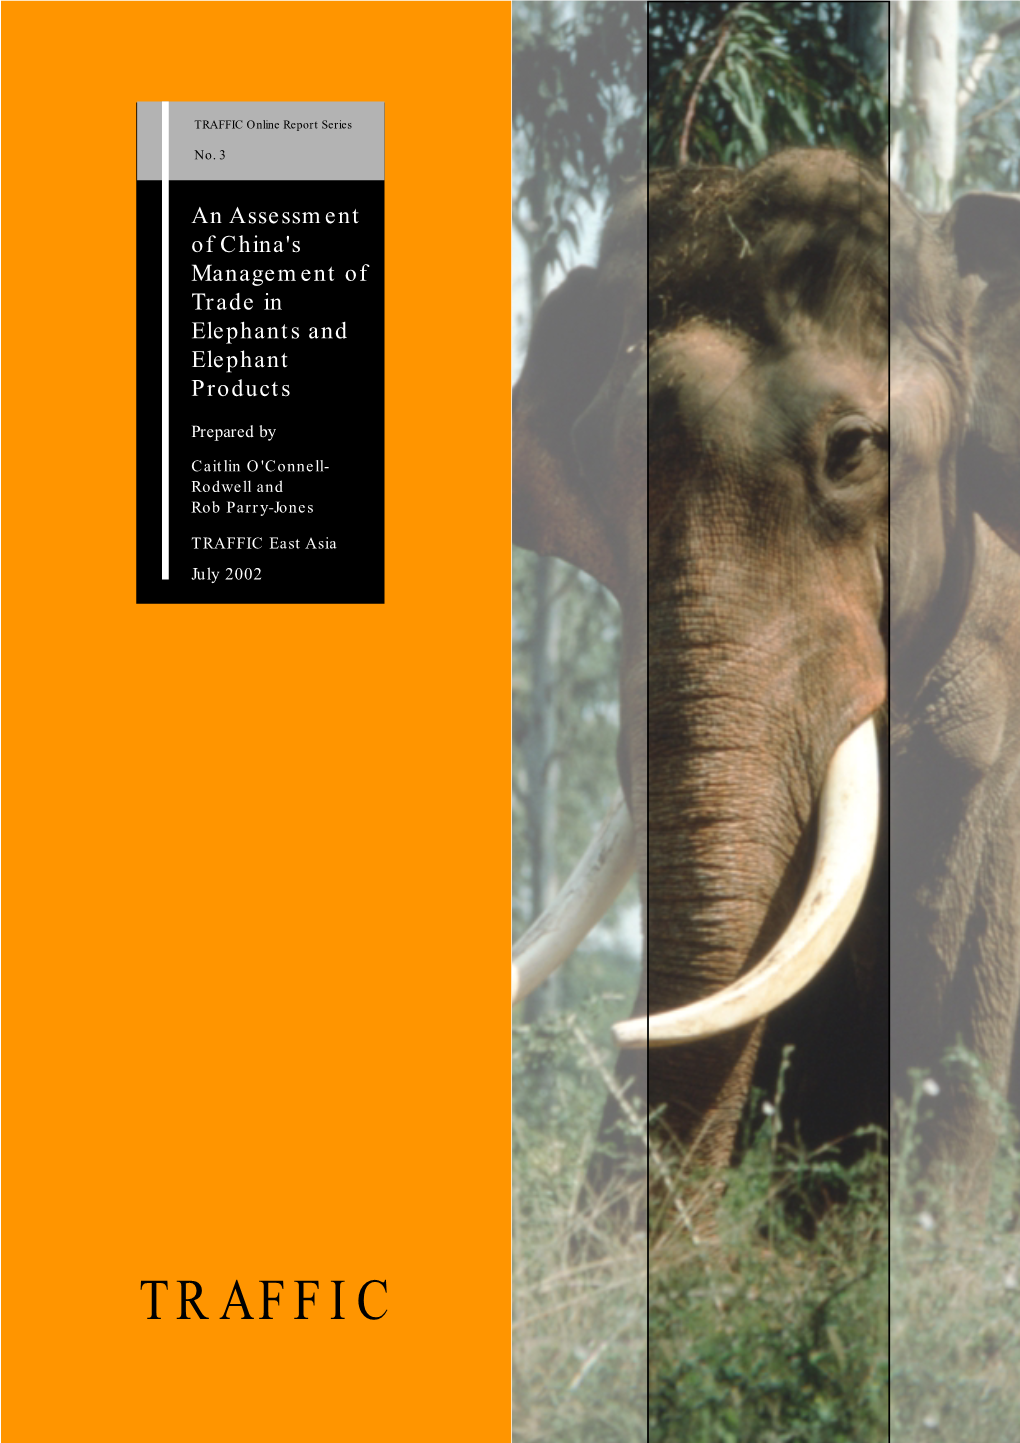 Assessment of China's Management of Trade in Elephants & Elephant Products